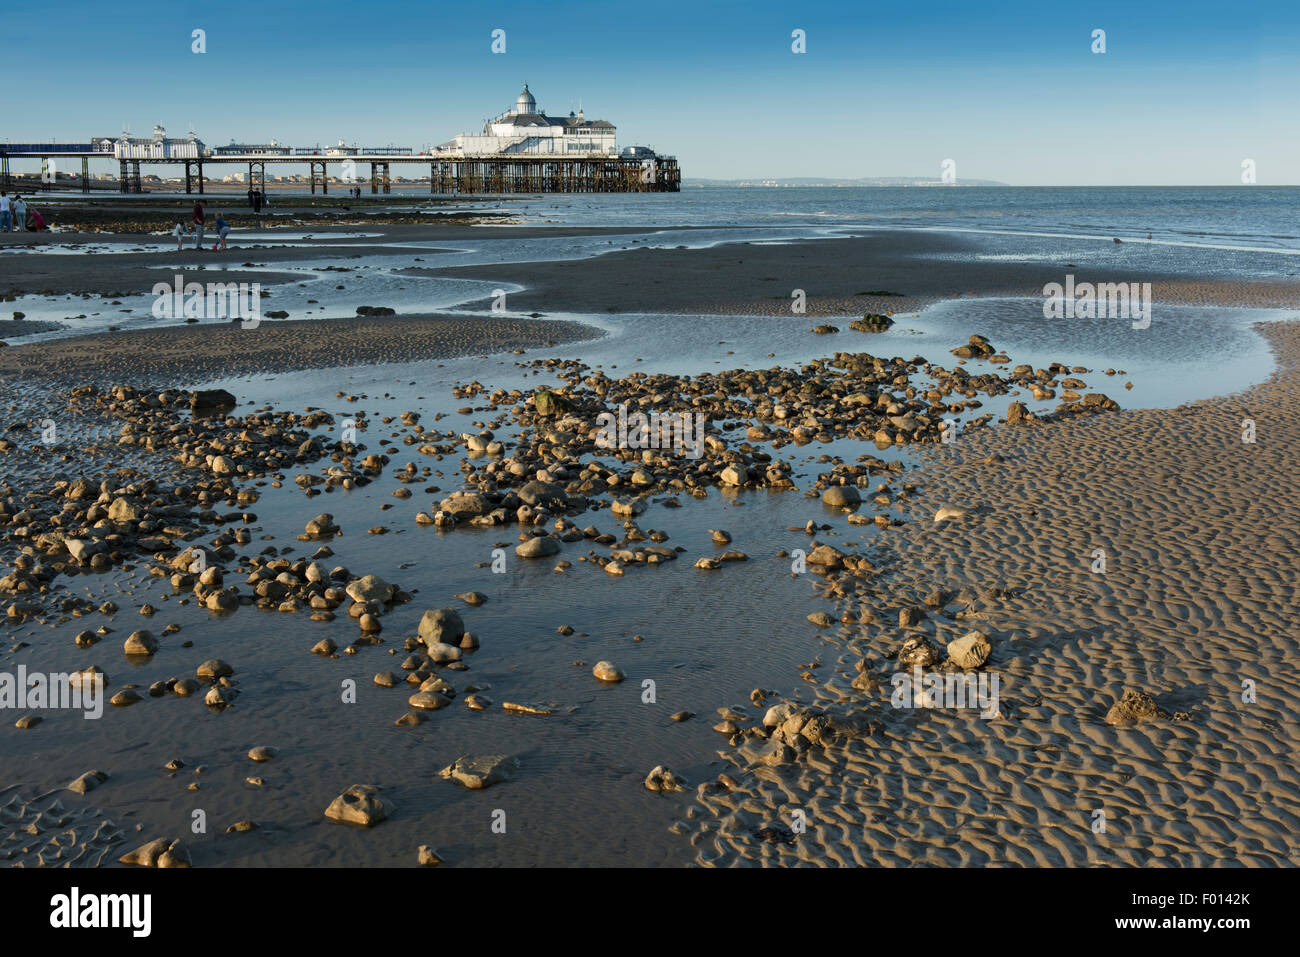 The beach at low tide, with the pier in the background, at Eastbourne, East Sussex, England, UK. Stock Photo